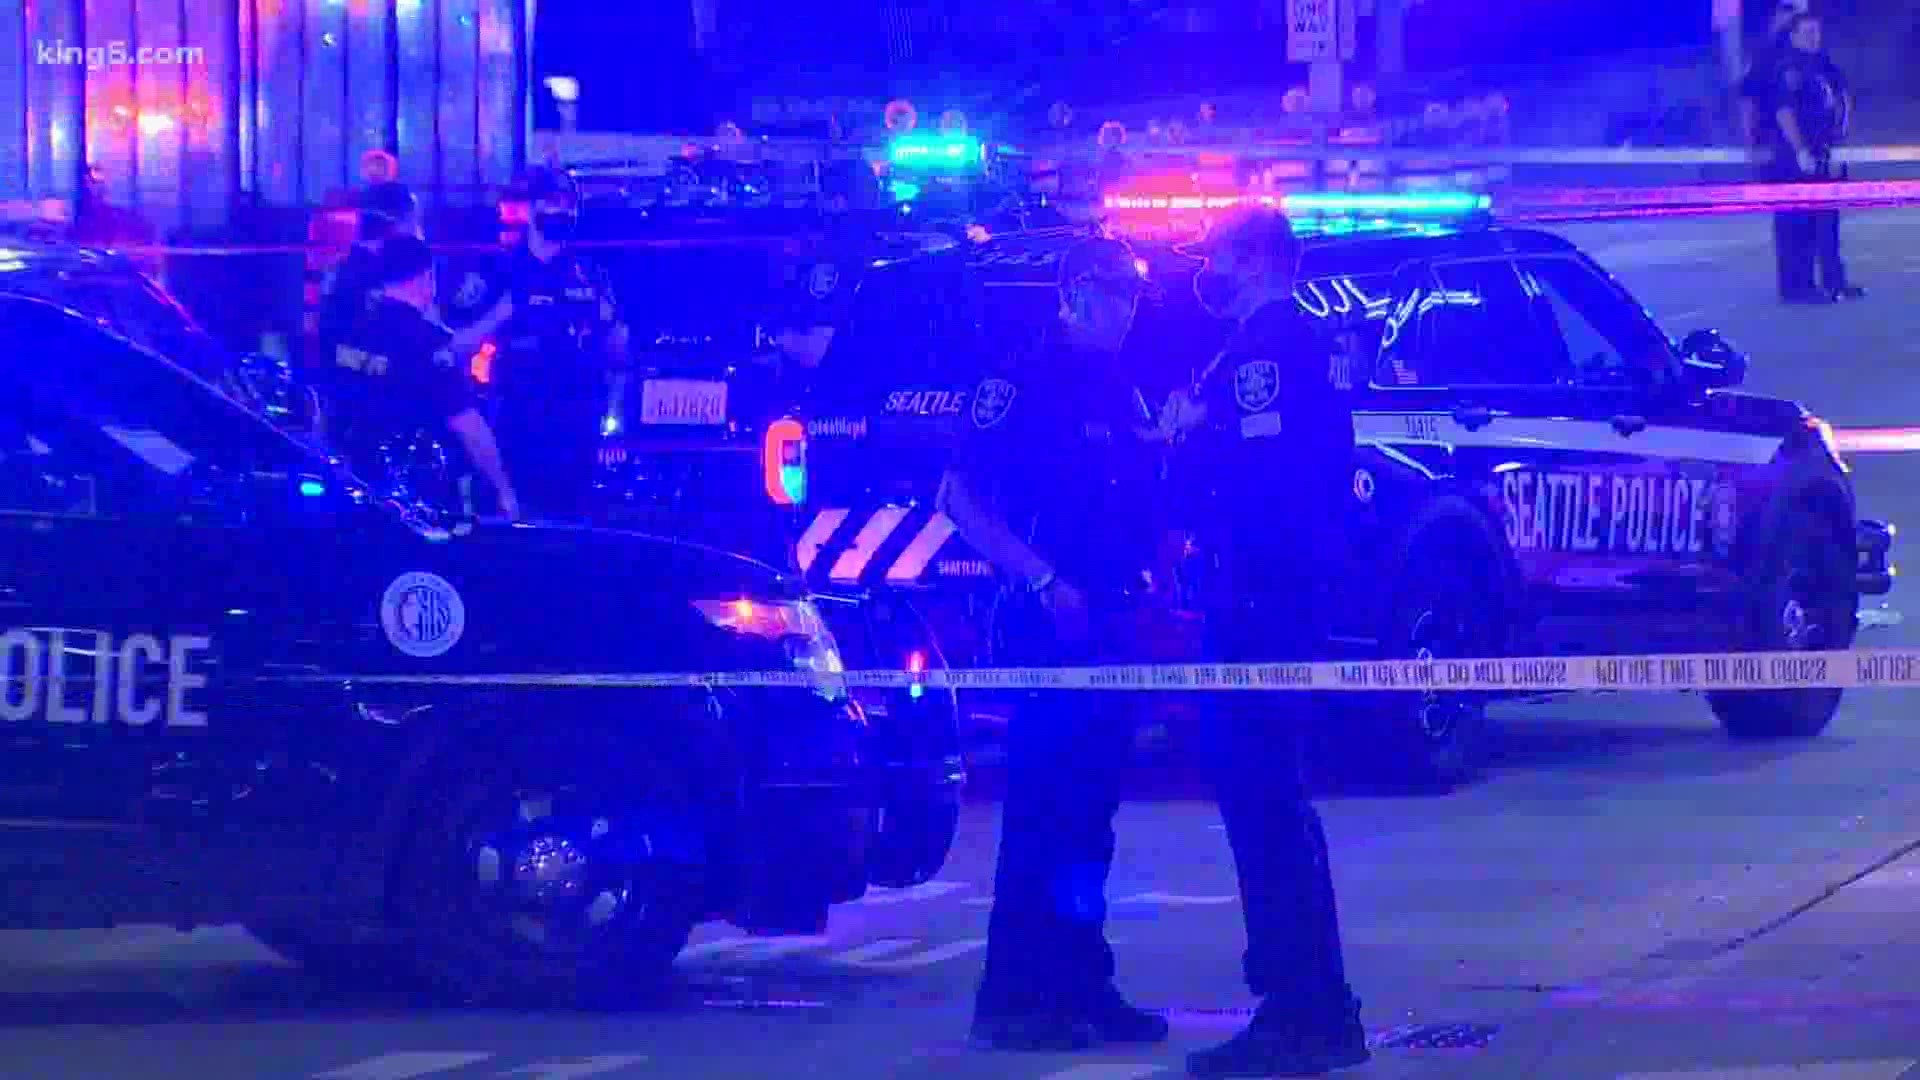 Seattle police are investigating after a man was injured in shooting early Wednesday morning.